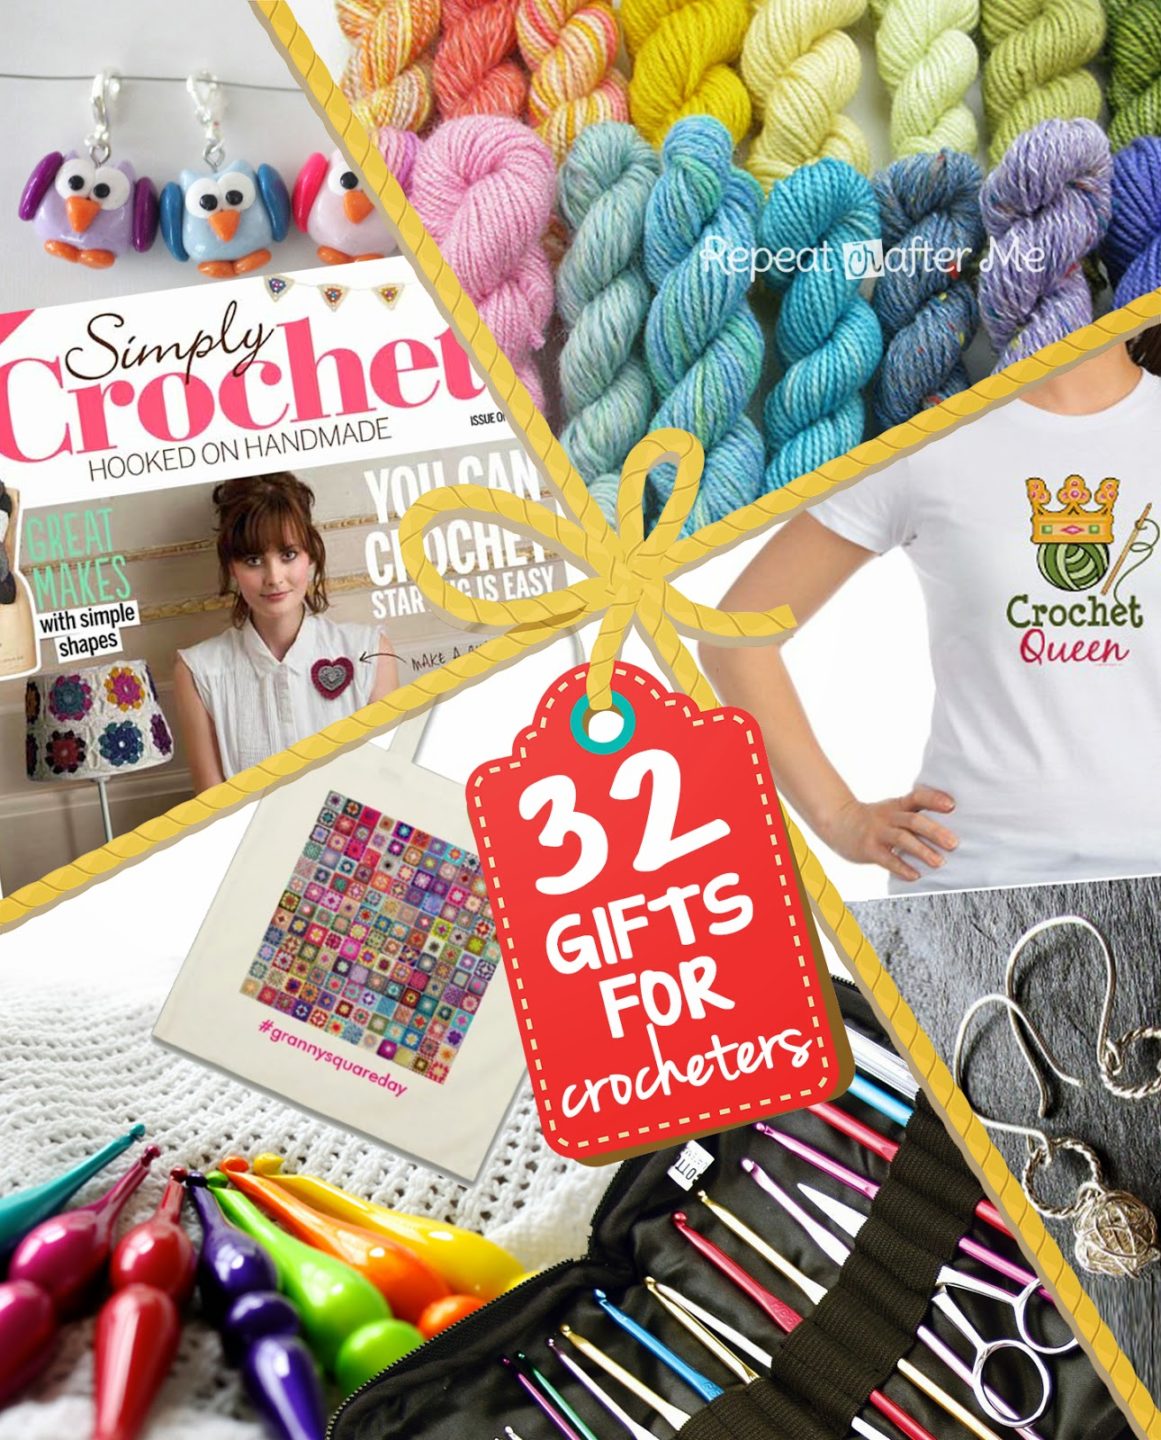 32 Gift Ideas for Crocheters - Repeat Crafter Me